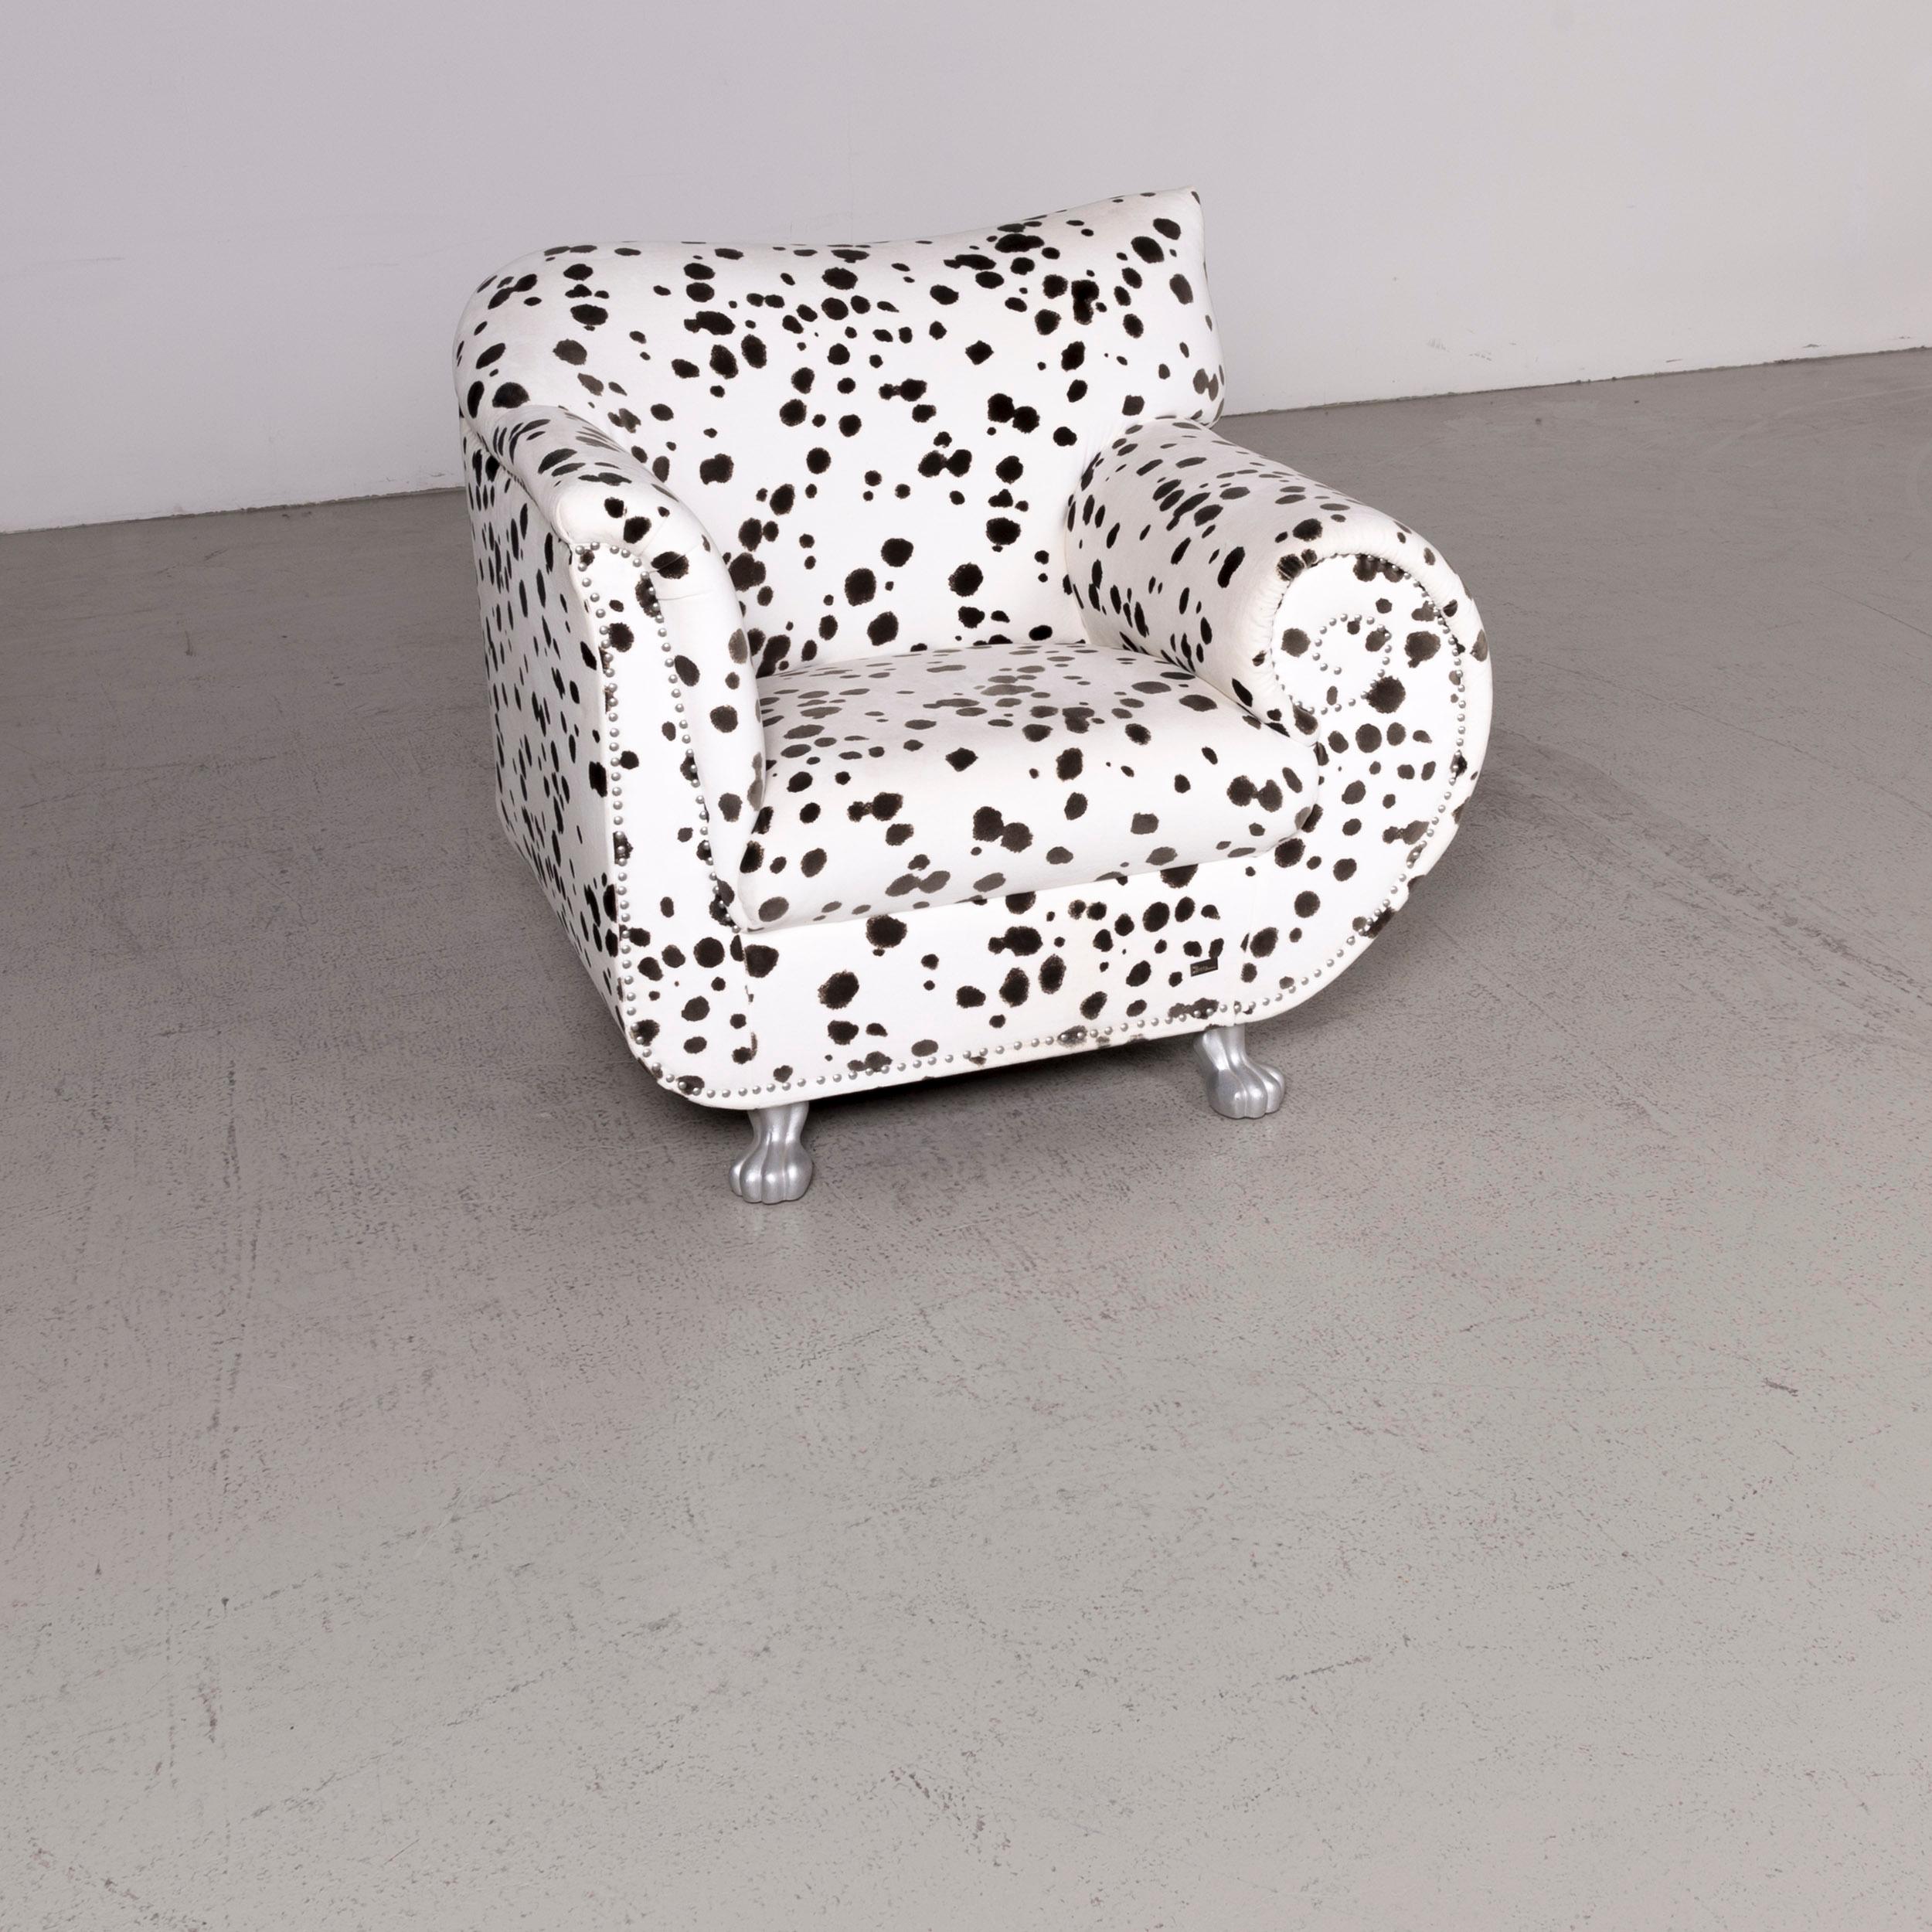 We bring to you a Bretz Gaudi designer fabric armchair white Dalmatian pattern chair with stool.

Product measurements in centimeters:

Depth 80
Width 100
Height 90
Seat-height 45
Rest-height 65
Seat-depth 50
Seat-width 50
Back-height